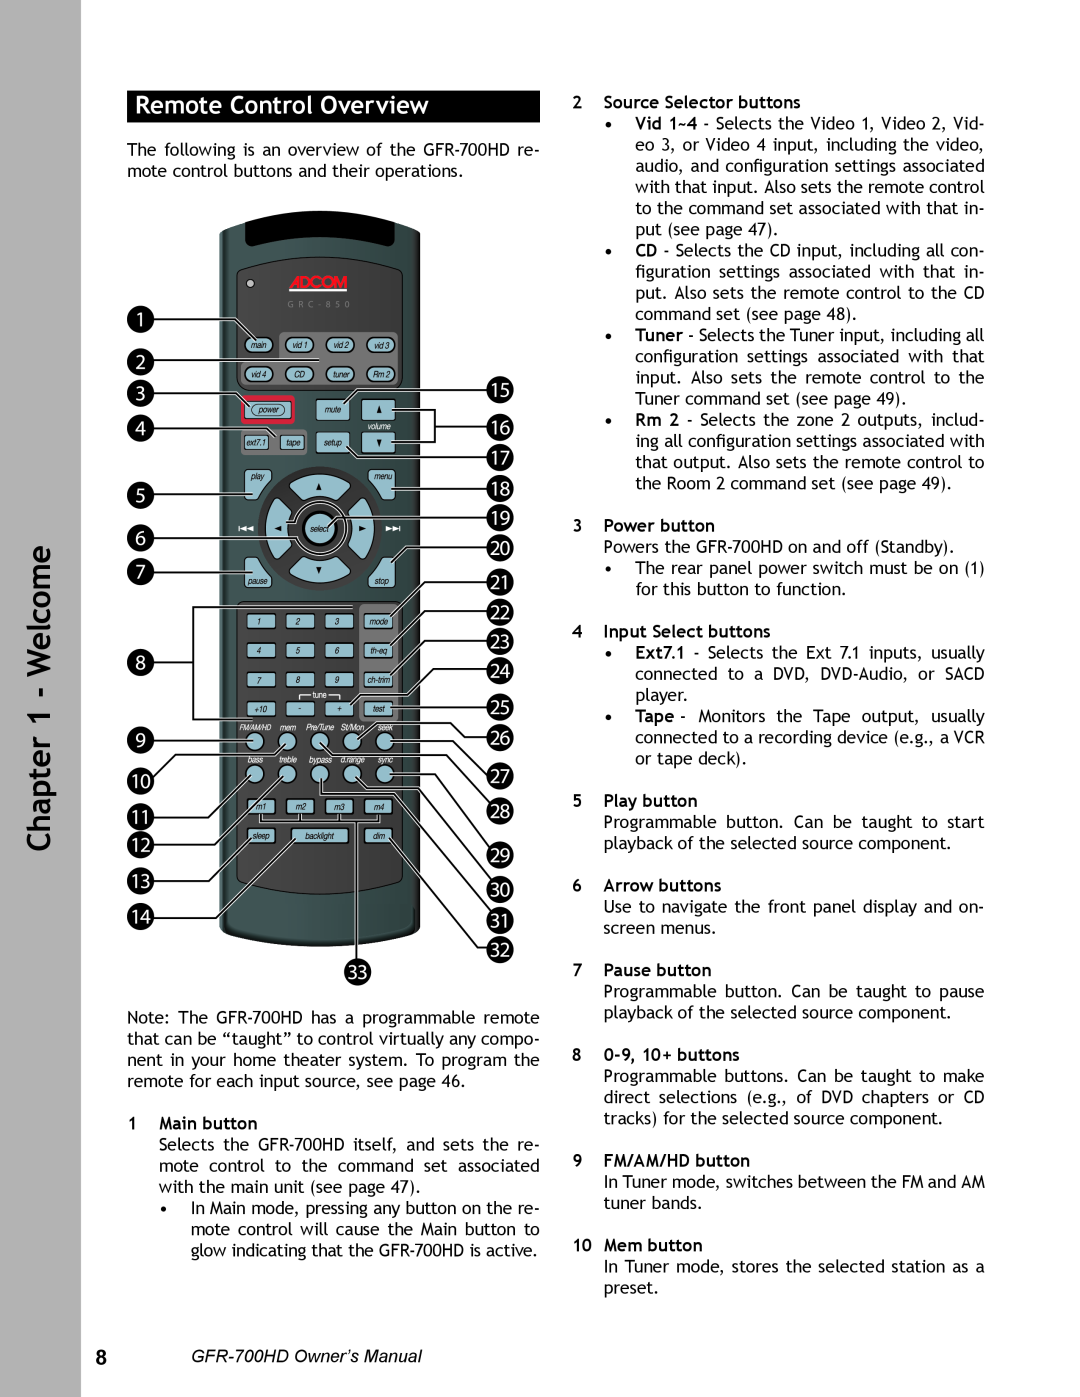 Adcom GFR-700HD Remote Control Overview, 1Main button, 2Source Selector buttons, 3Power button, 4Input Select buttons 